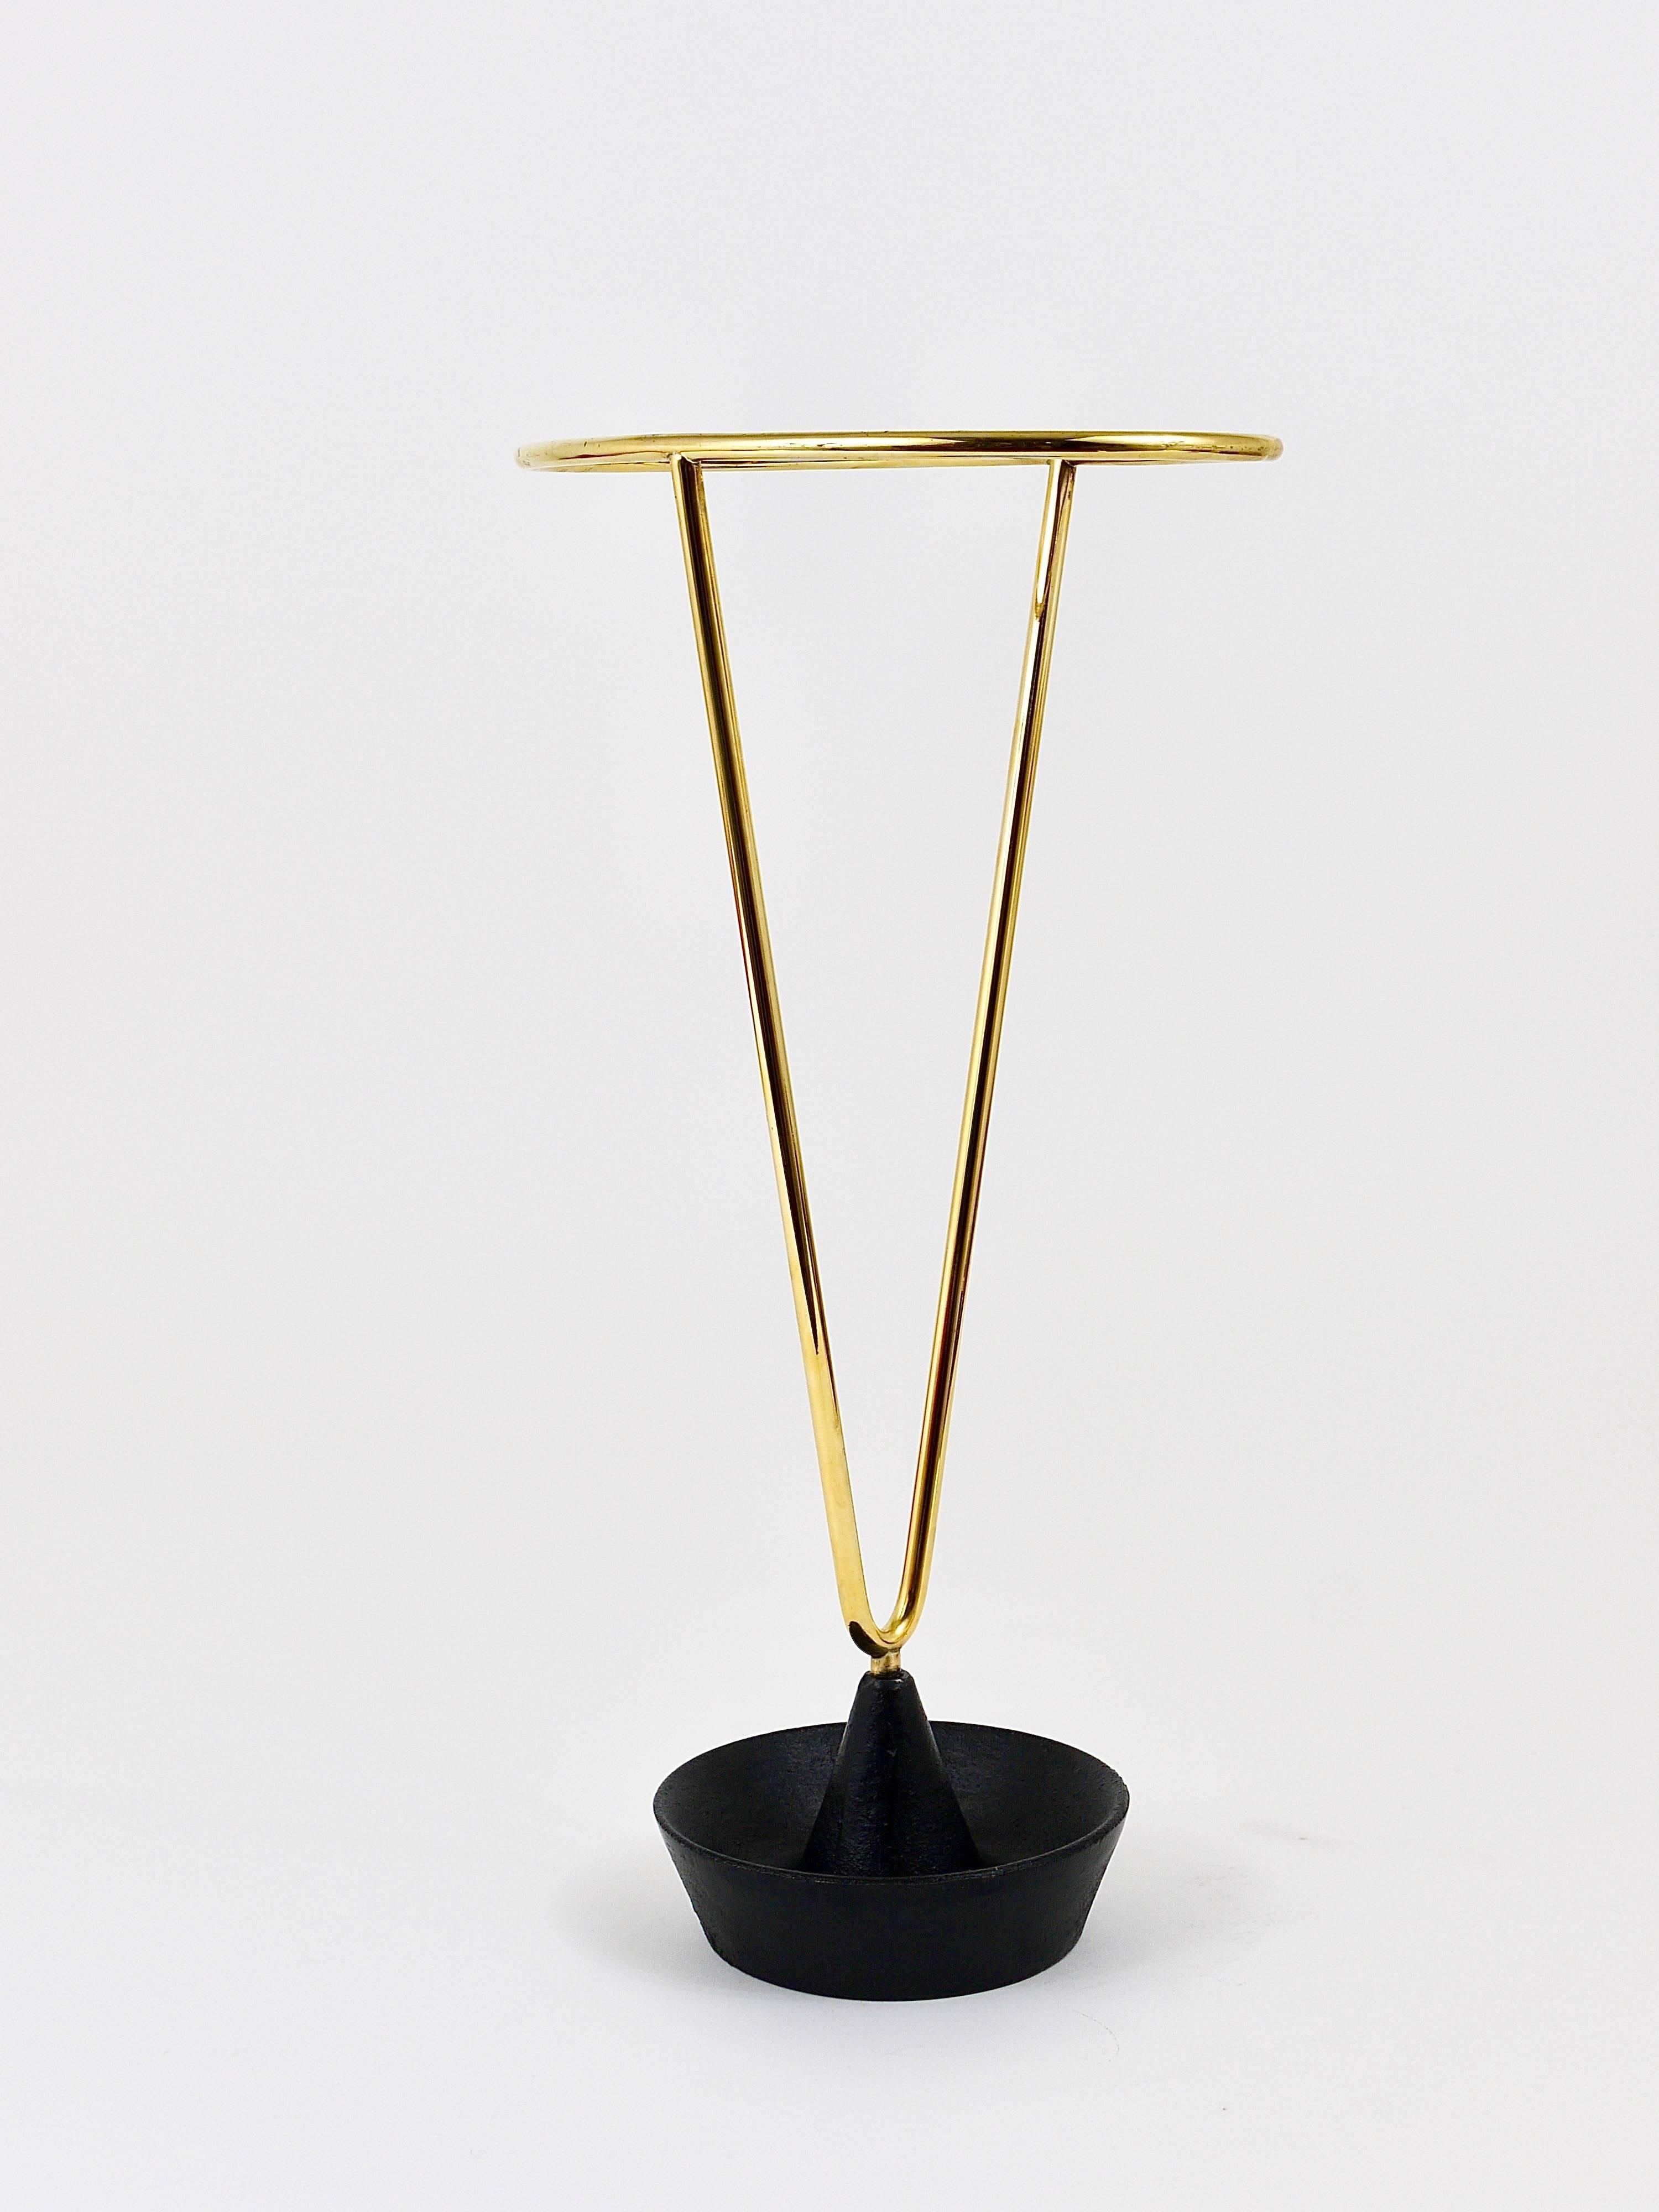 A straight and beautiful Austrian umbrella stand, made of brass and cast iron. Designed and executed by Carl Auböck. A sophisticated piece, one of the most beautiful umbrella stands we know. In excellent condition. Marked.